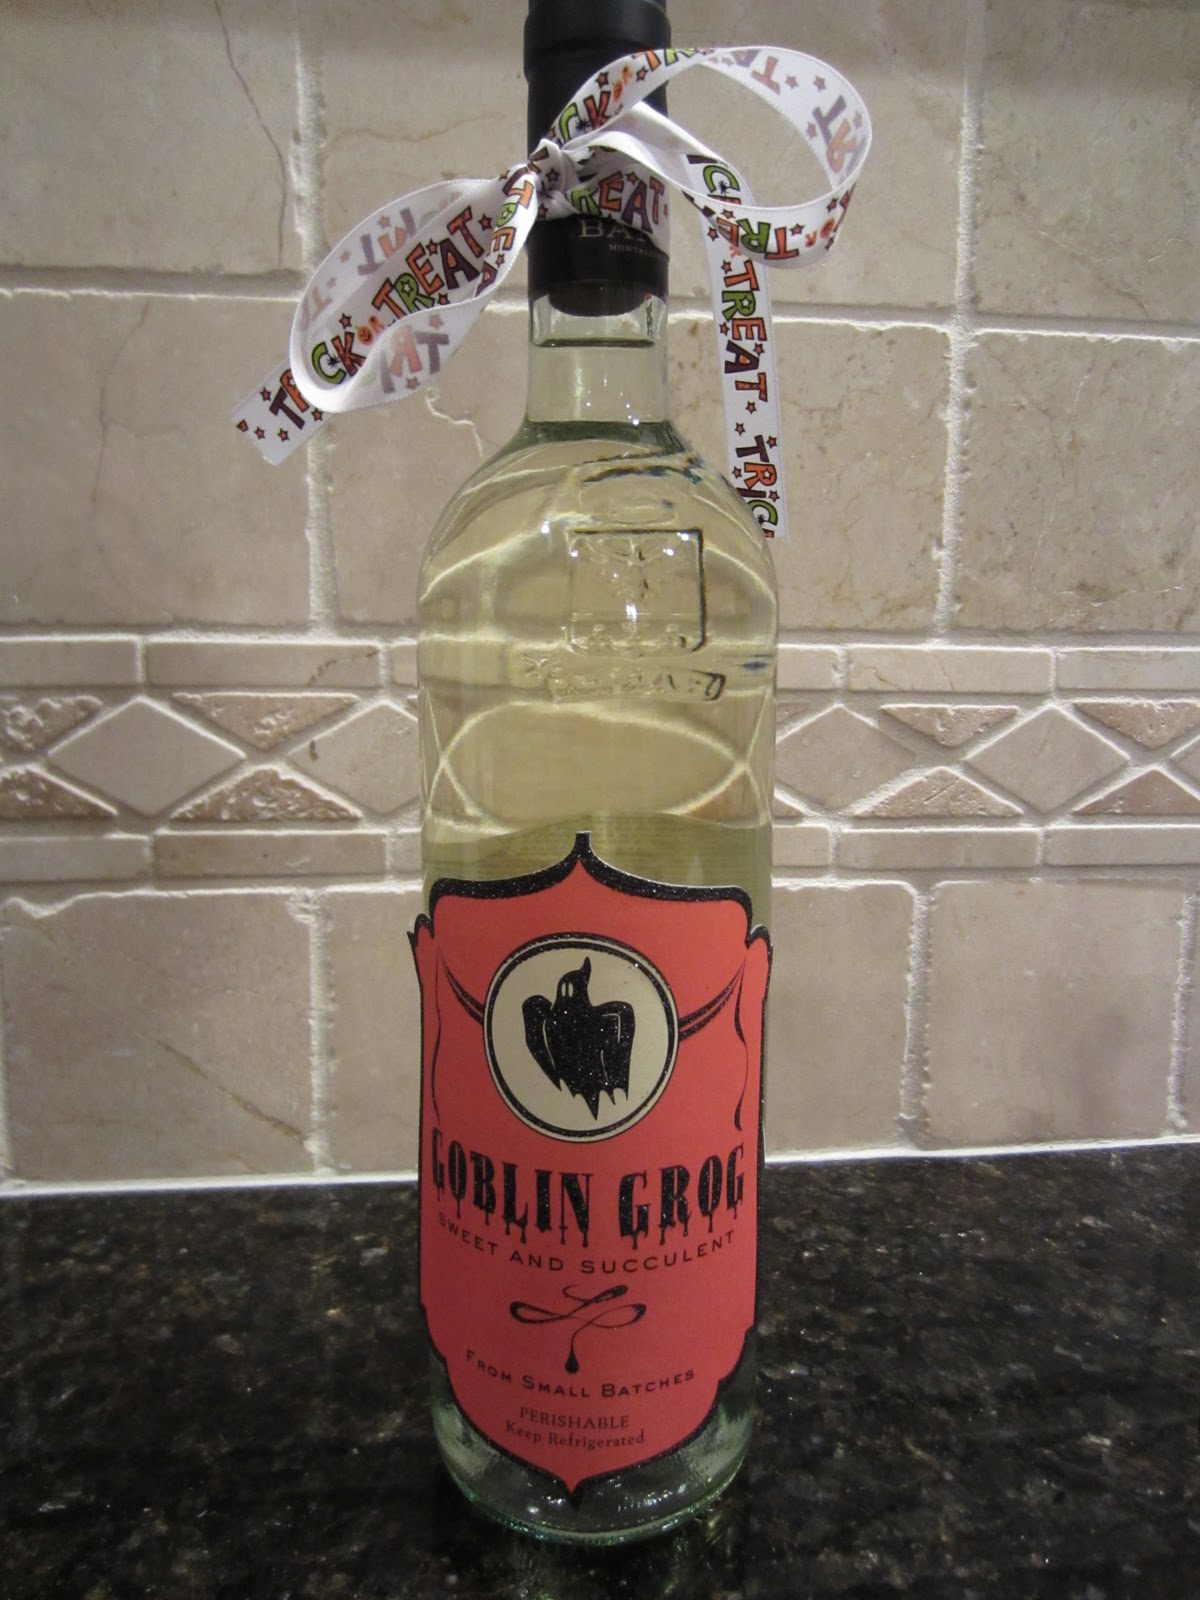 Halloween inspired wine label - a great treat for the adults!